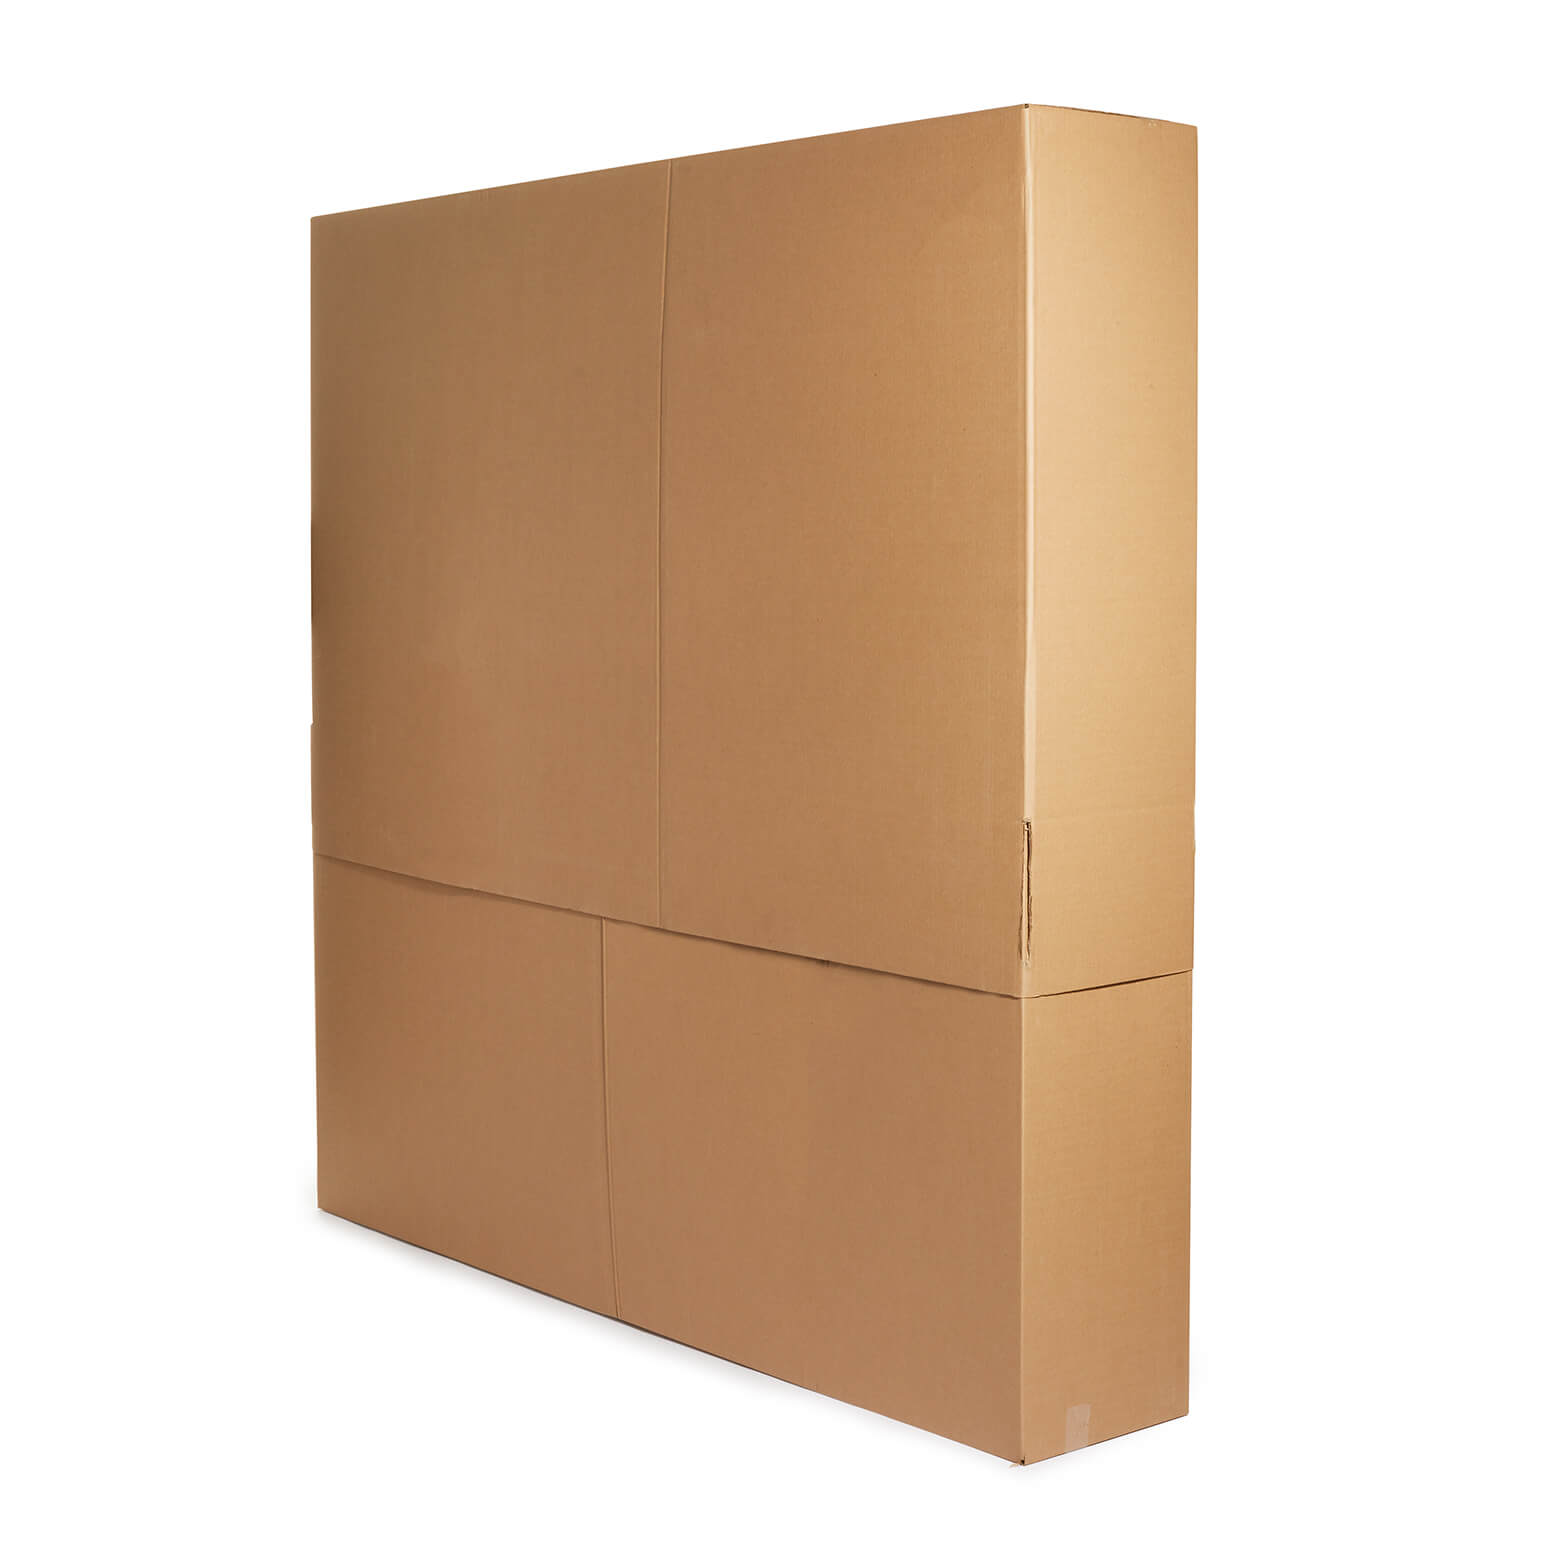 Mattress Moving Boxes How To Pack And Move A Kind Size Mattress By Yourself Moving A 1237